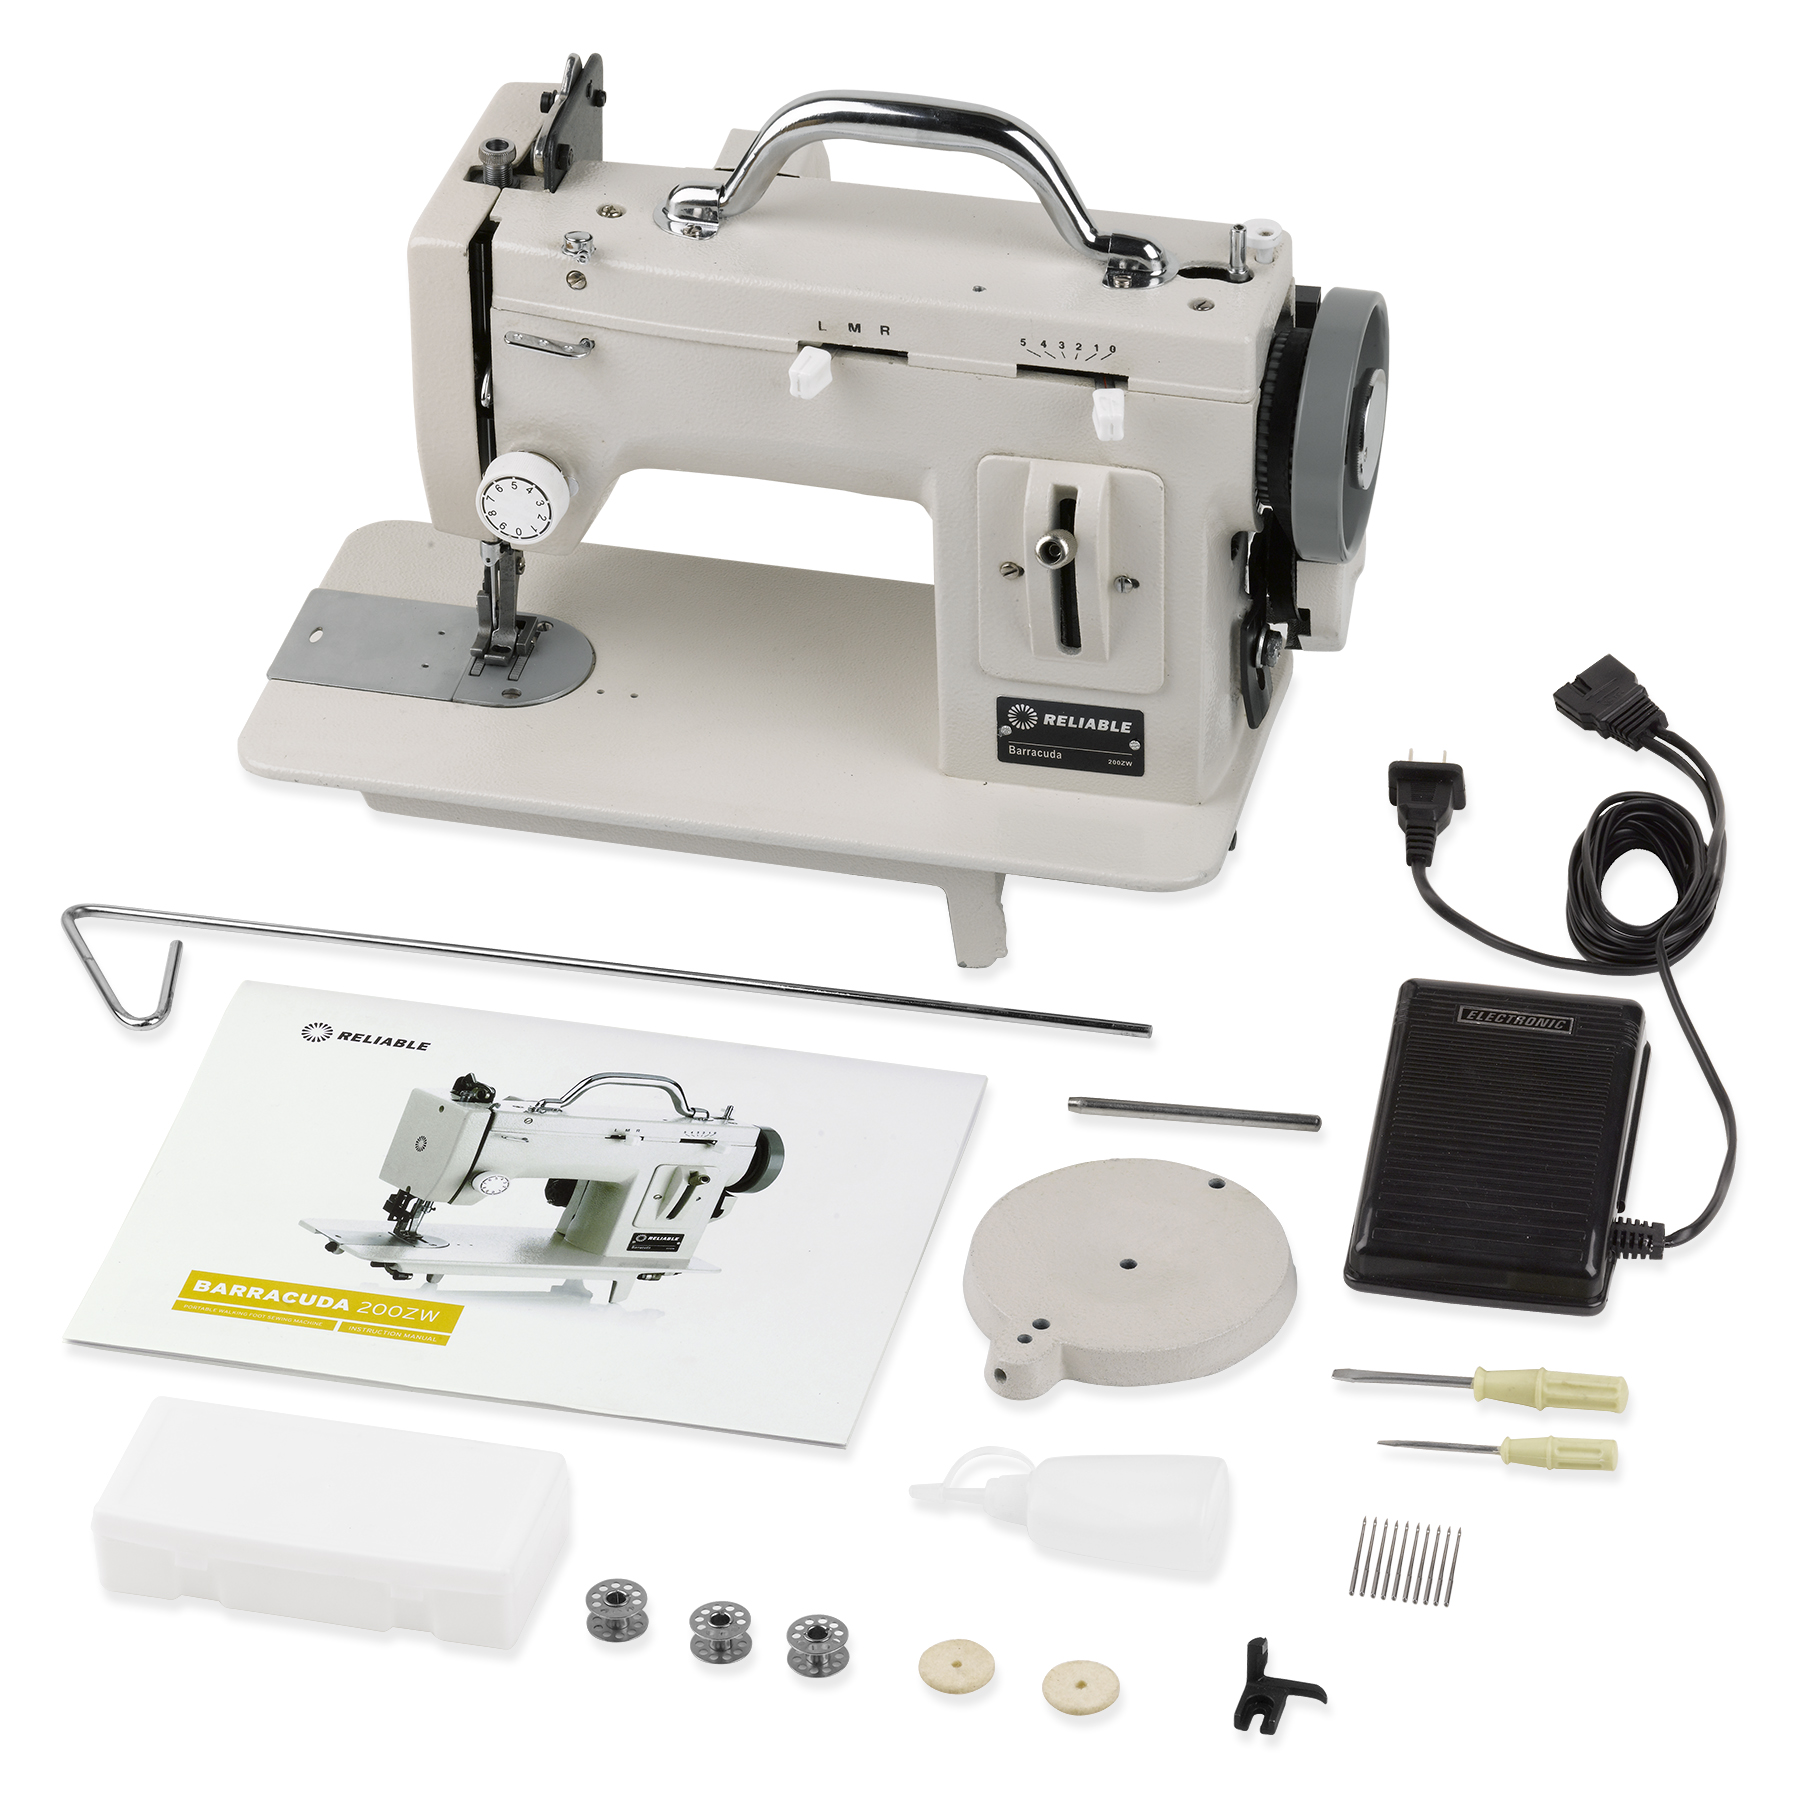 Reliable Barracuda 200ZW Zig Zag Portable Sewing Machine - Sewing Gold